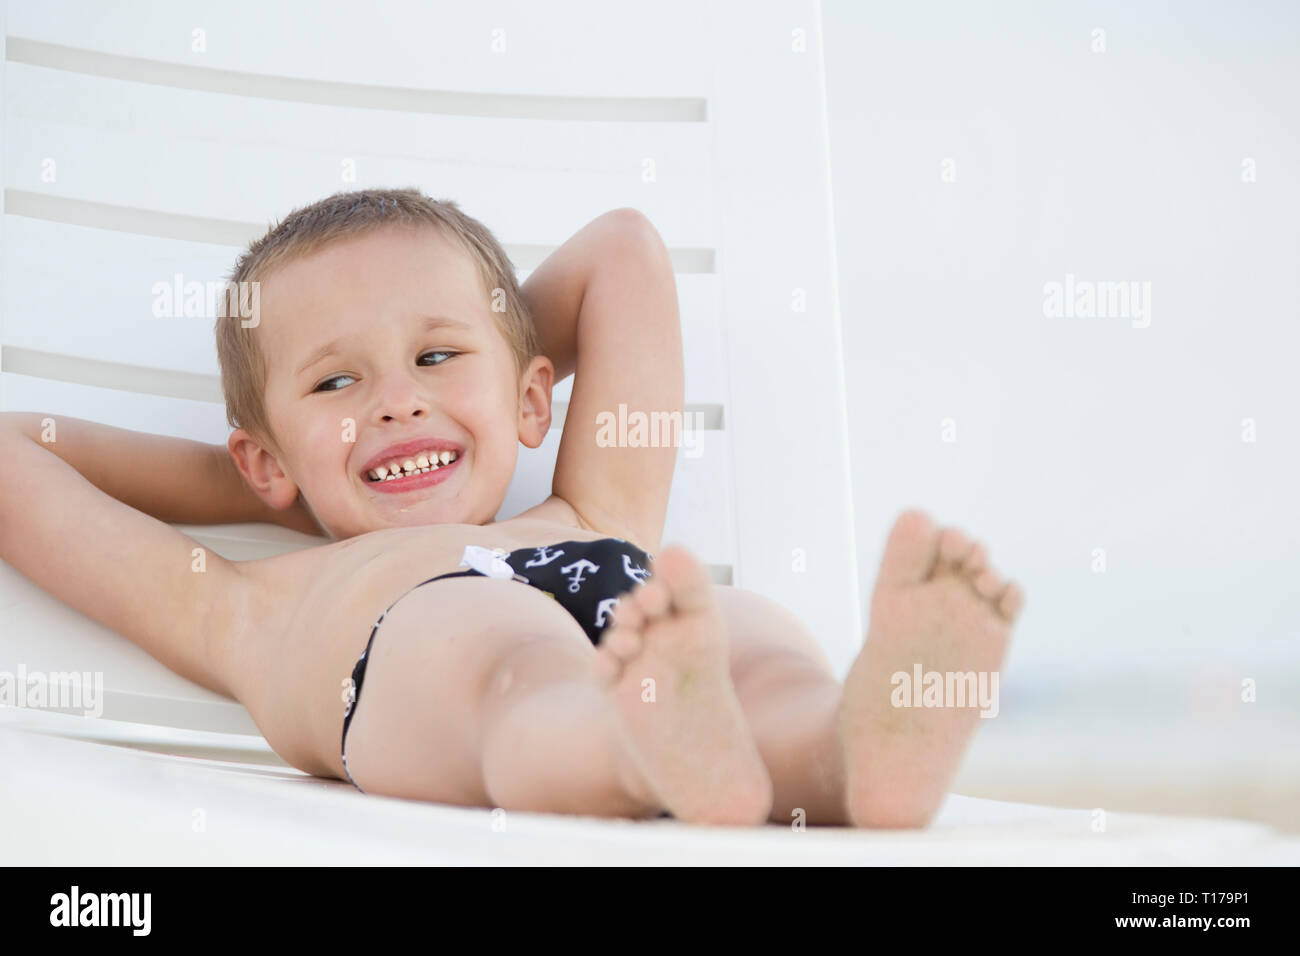 A Child In A Lounge Chair By The Sea Little Boy Resting On The